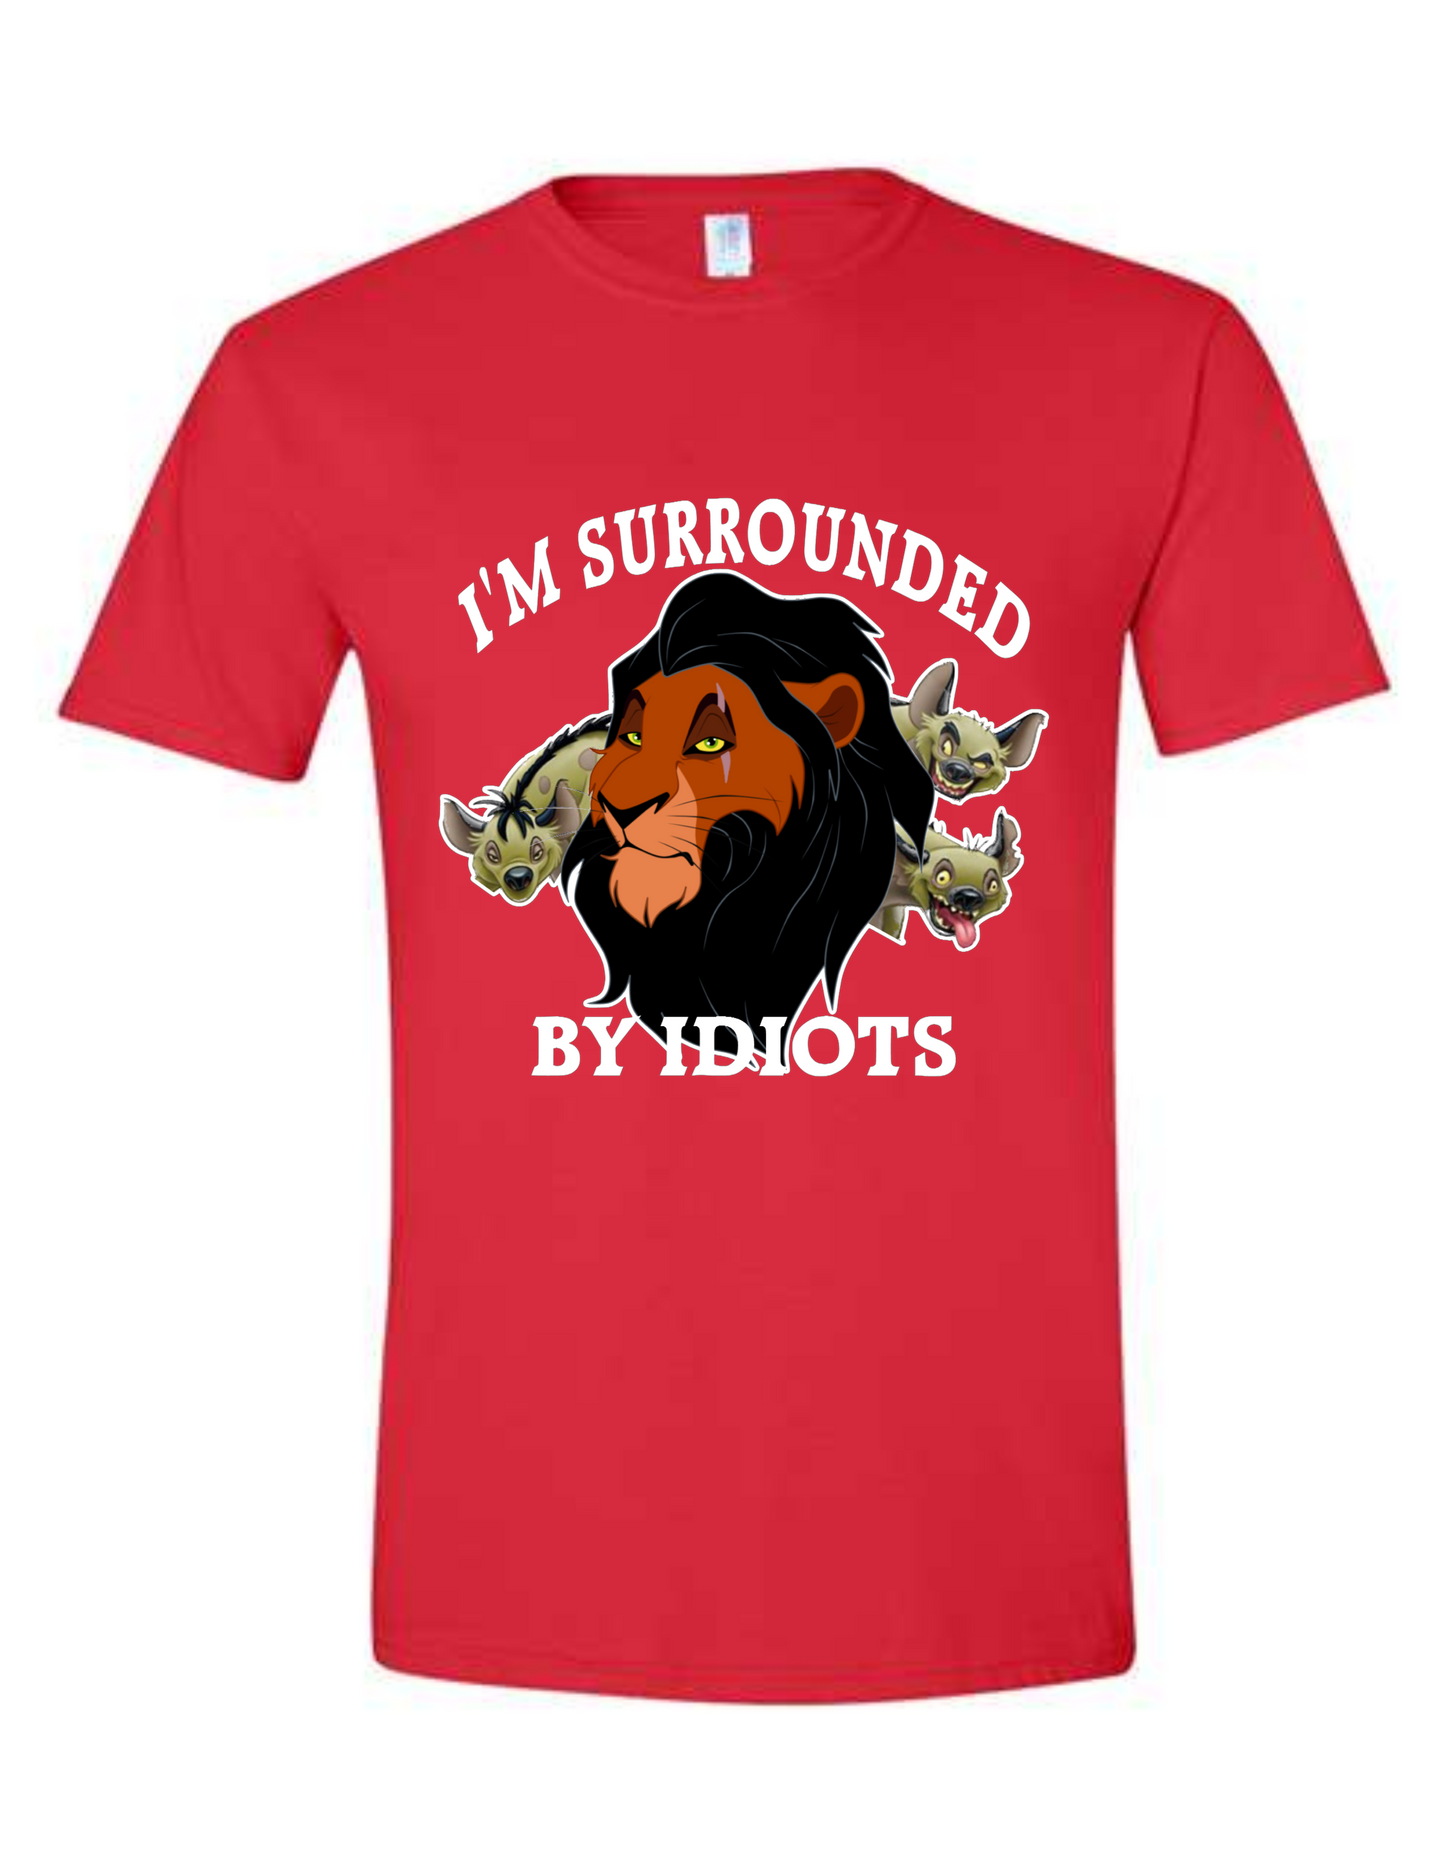 Surrounded By Idiots Tee